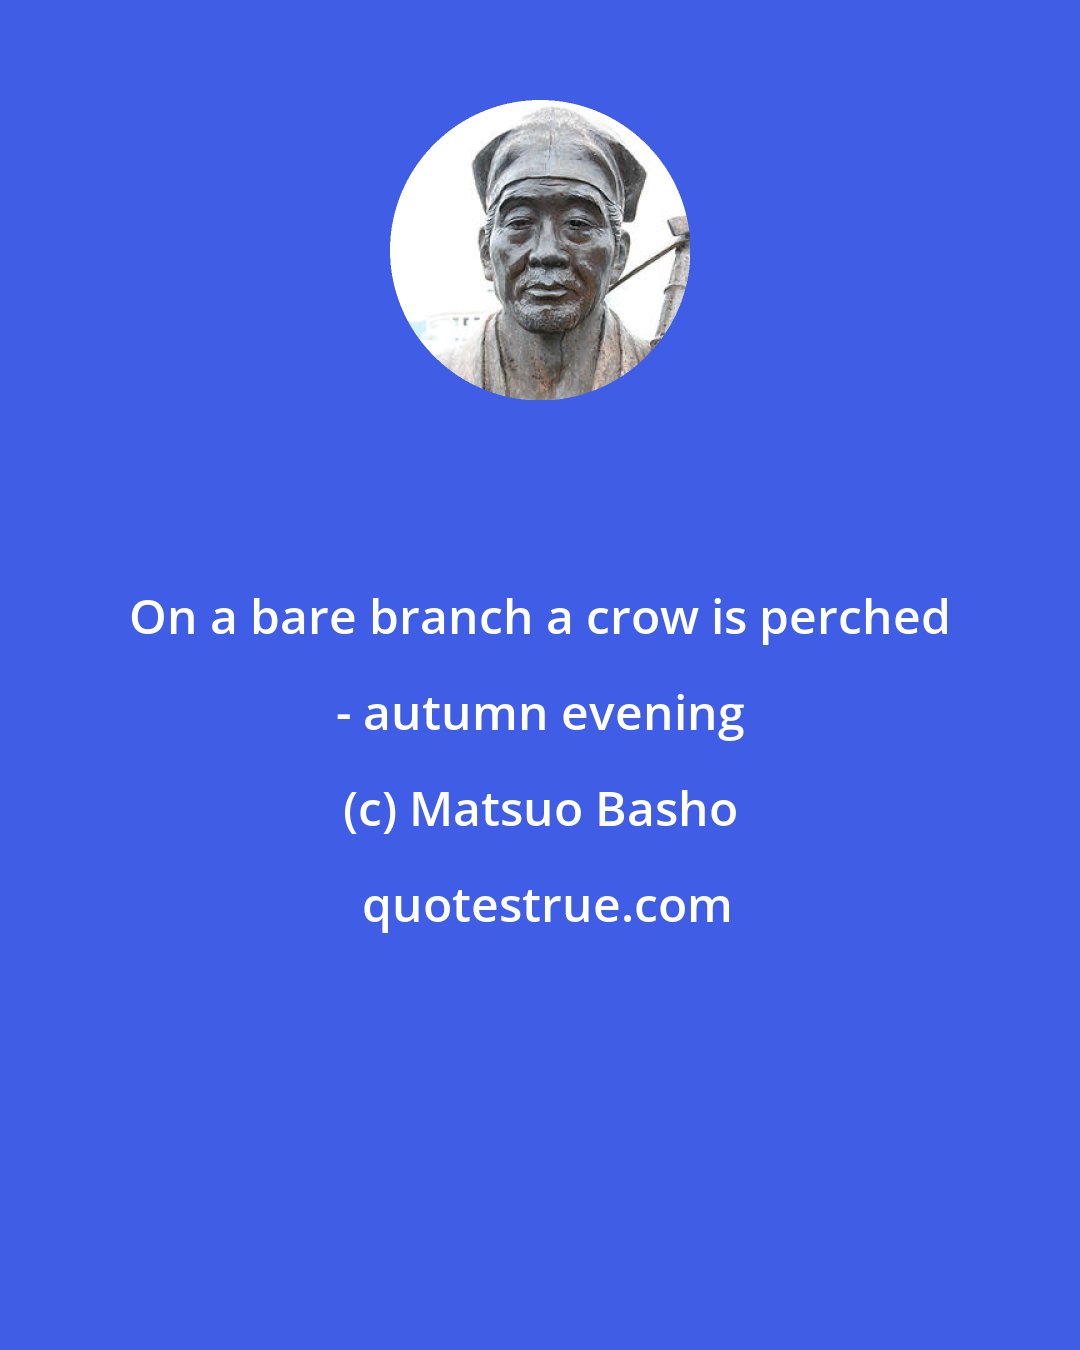 Matsuo Basho: On a bare branch a crow is perched - autumn evening